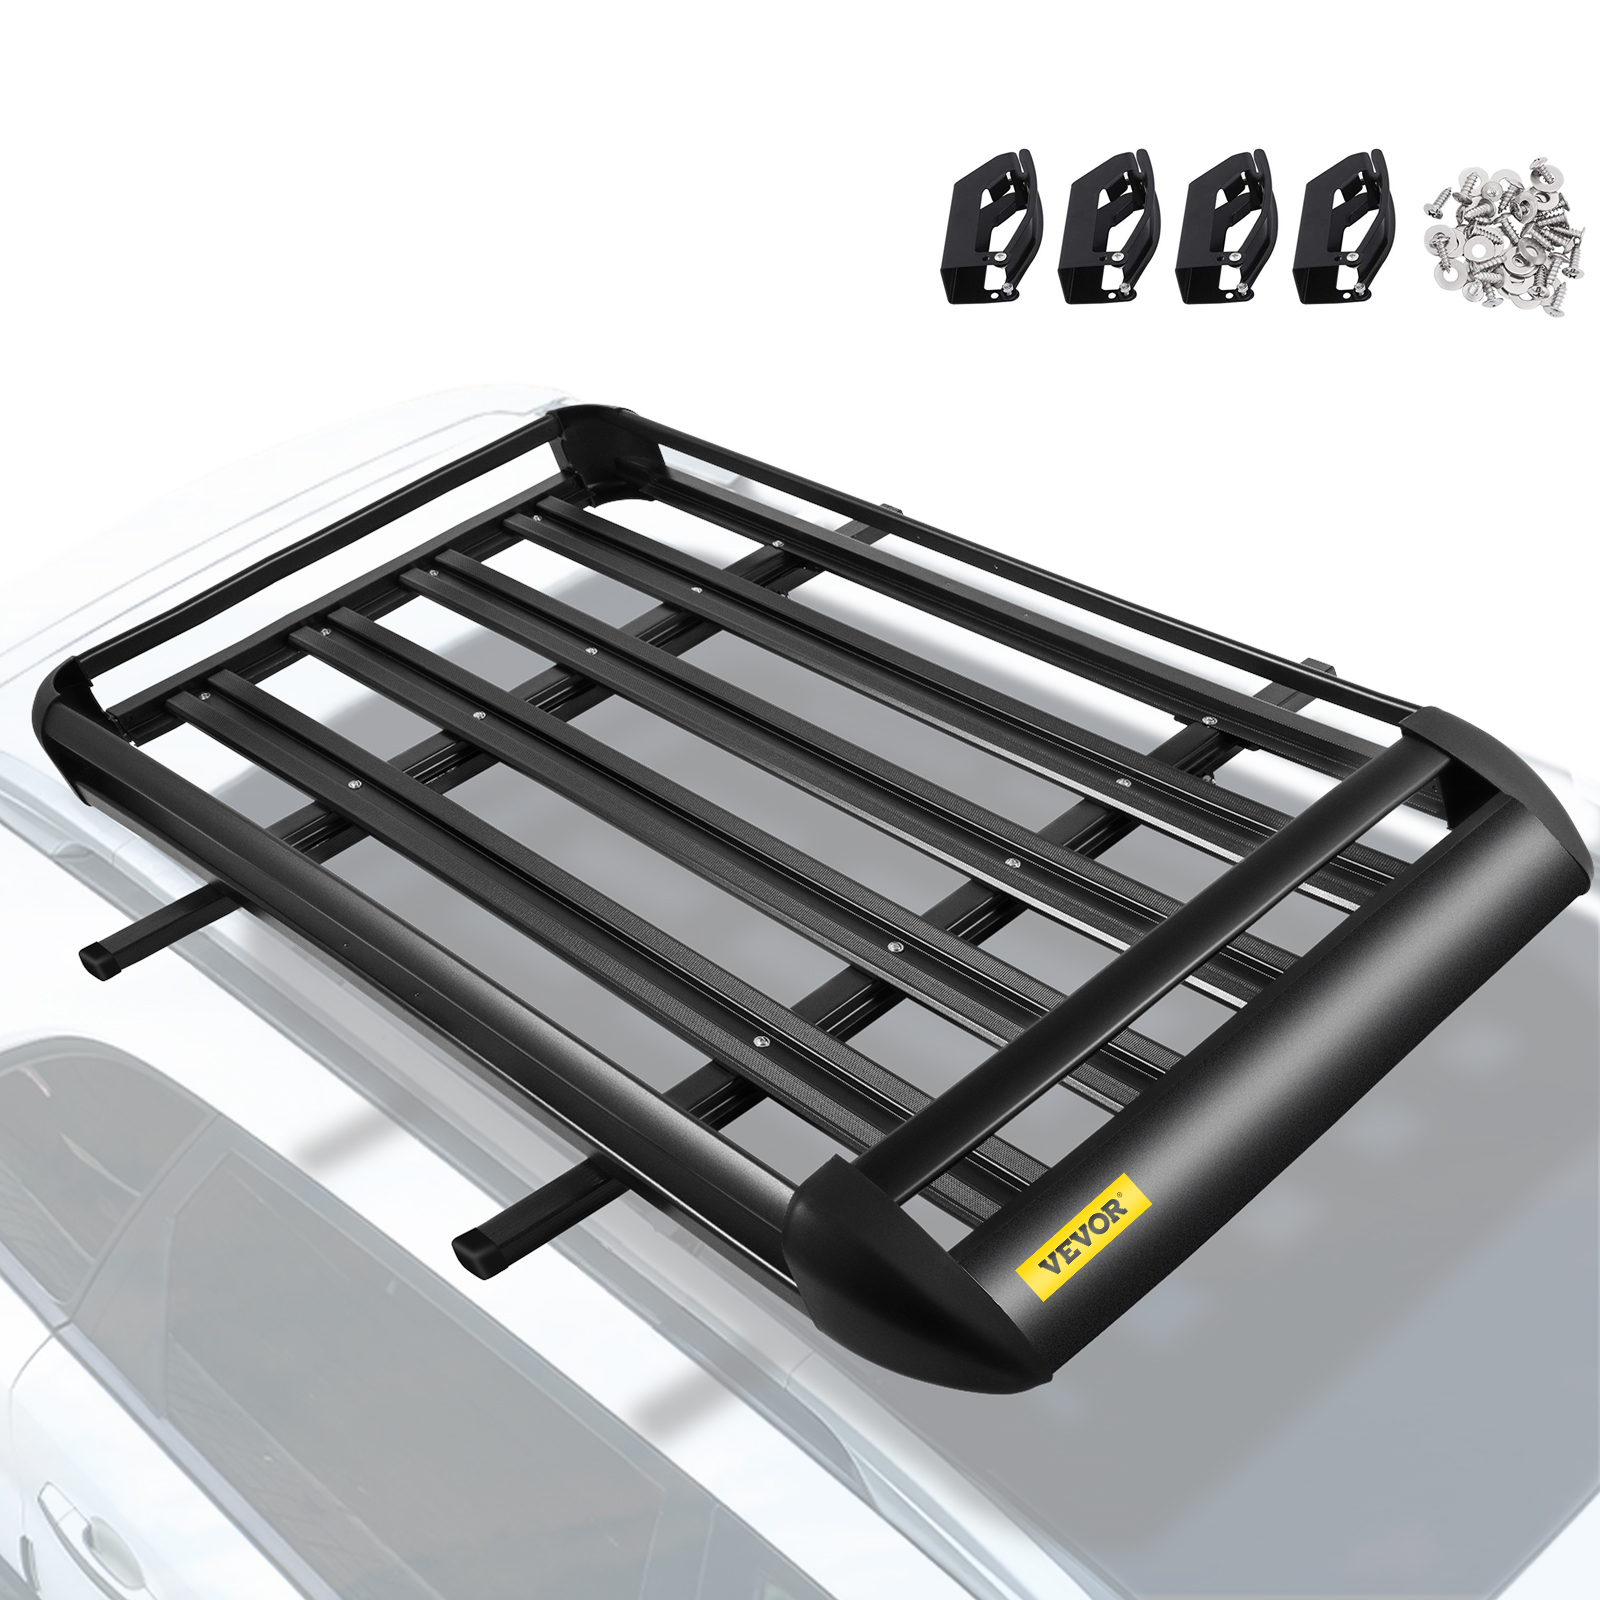 Aluminum Roof Rack VEVOR Universal 64x40 Inch Roof Basket Basket Roof Mounted Cargo Rack with Bars XL-B for Car Top Luggage Traveling SUV Holder 63X 40 Roof Rack 